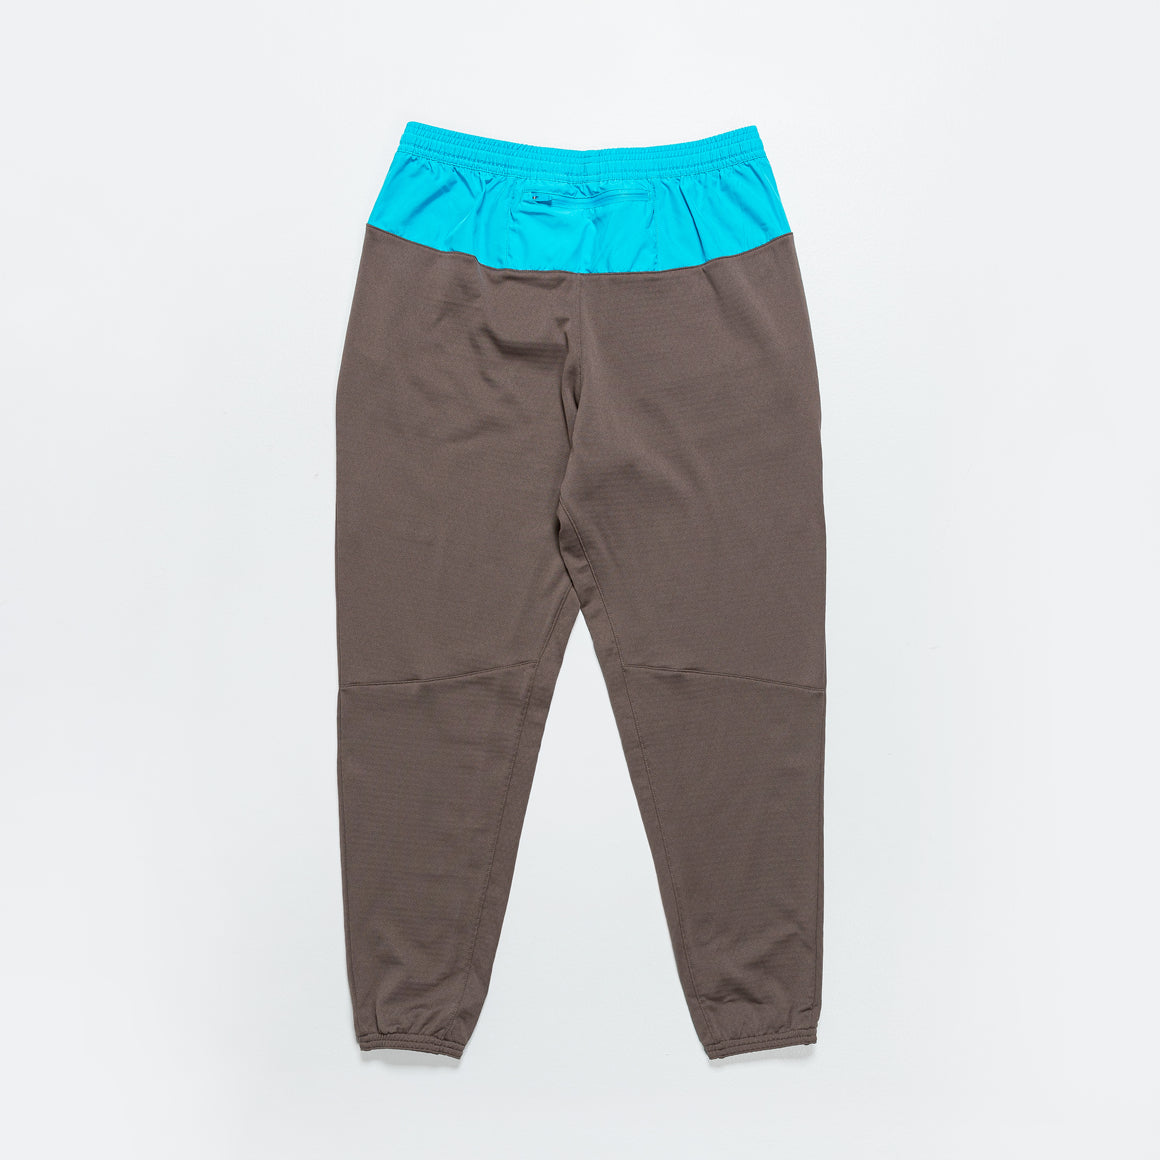 Trail Pant Mont Blanc - Ironstone/Laserblue